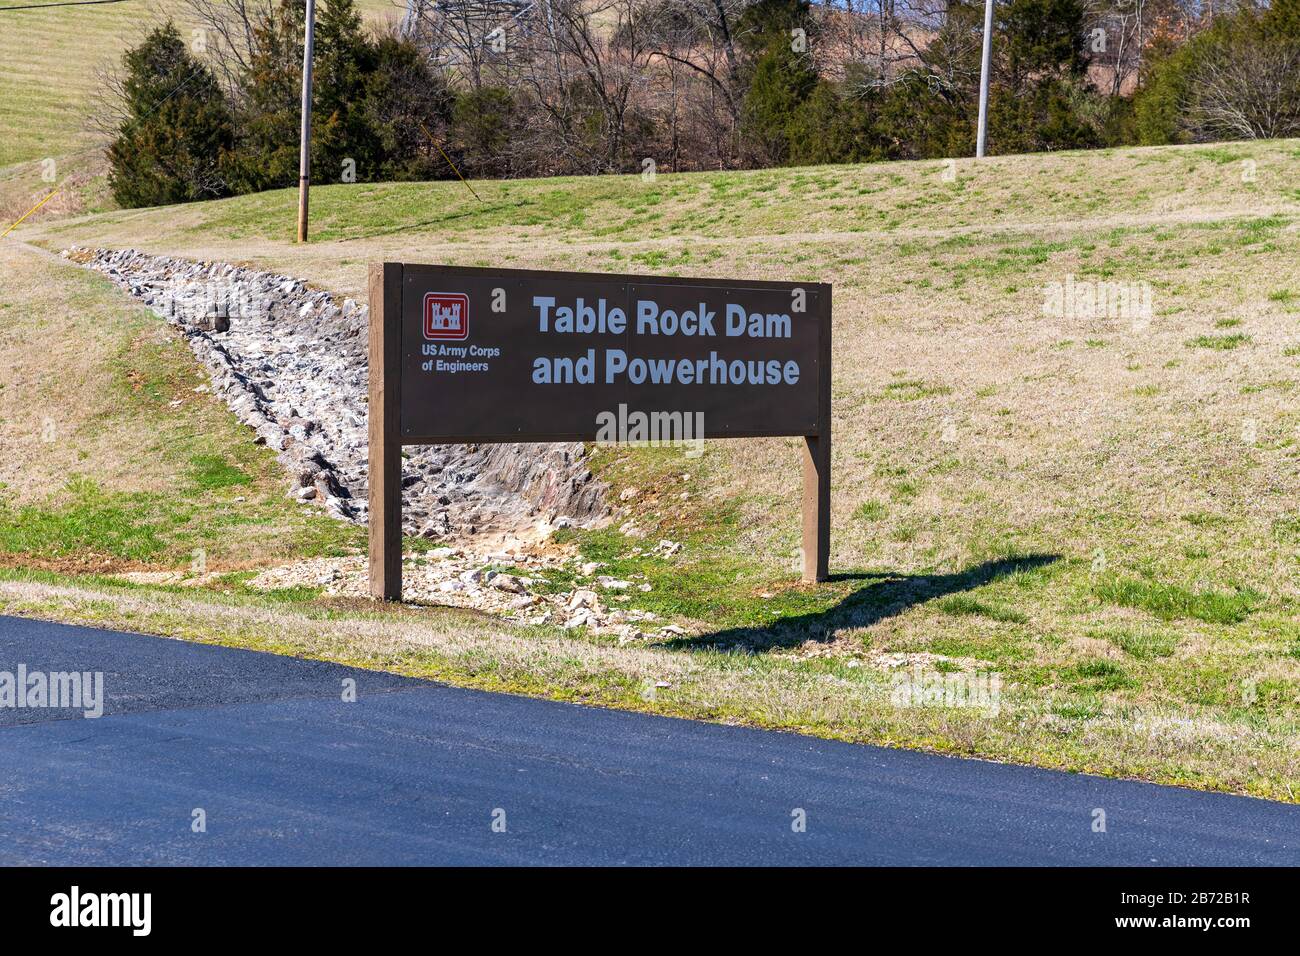 Branson, MO / USA - March 10, 2020: Table Rock Dam and Powerhouse sign, completed in 1958 by the U.S. Army Corps of Engineers, in the Ozarks of Southw Stock Photo